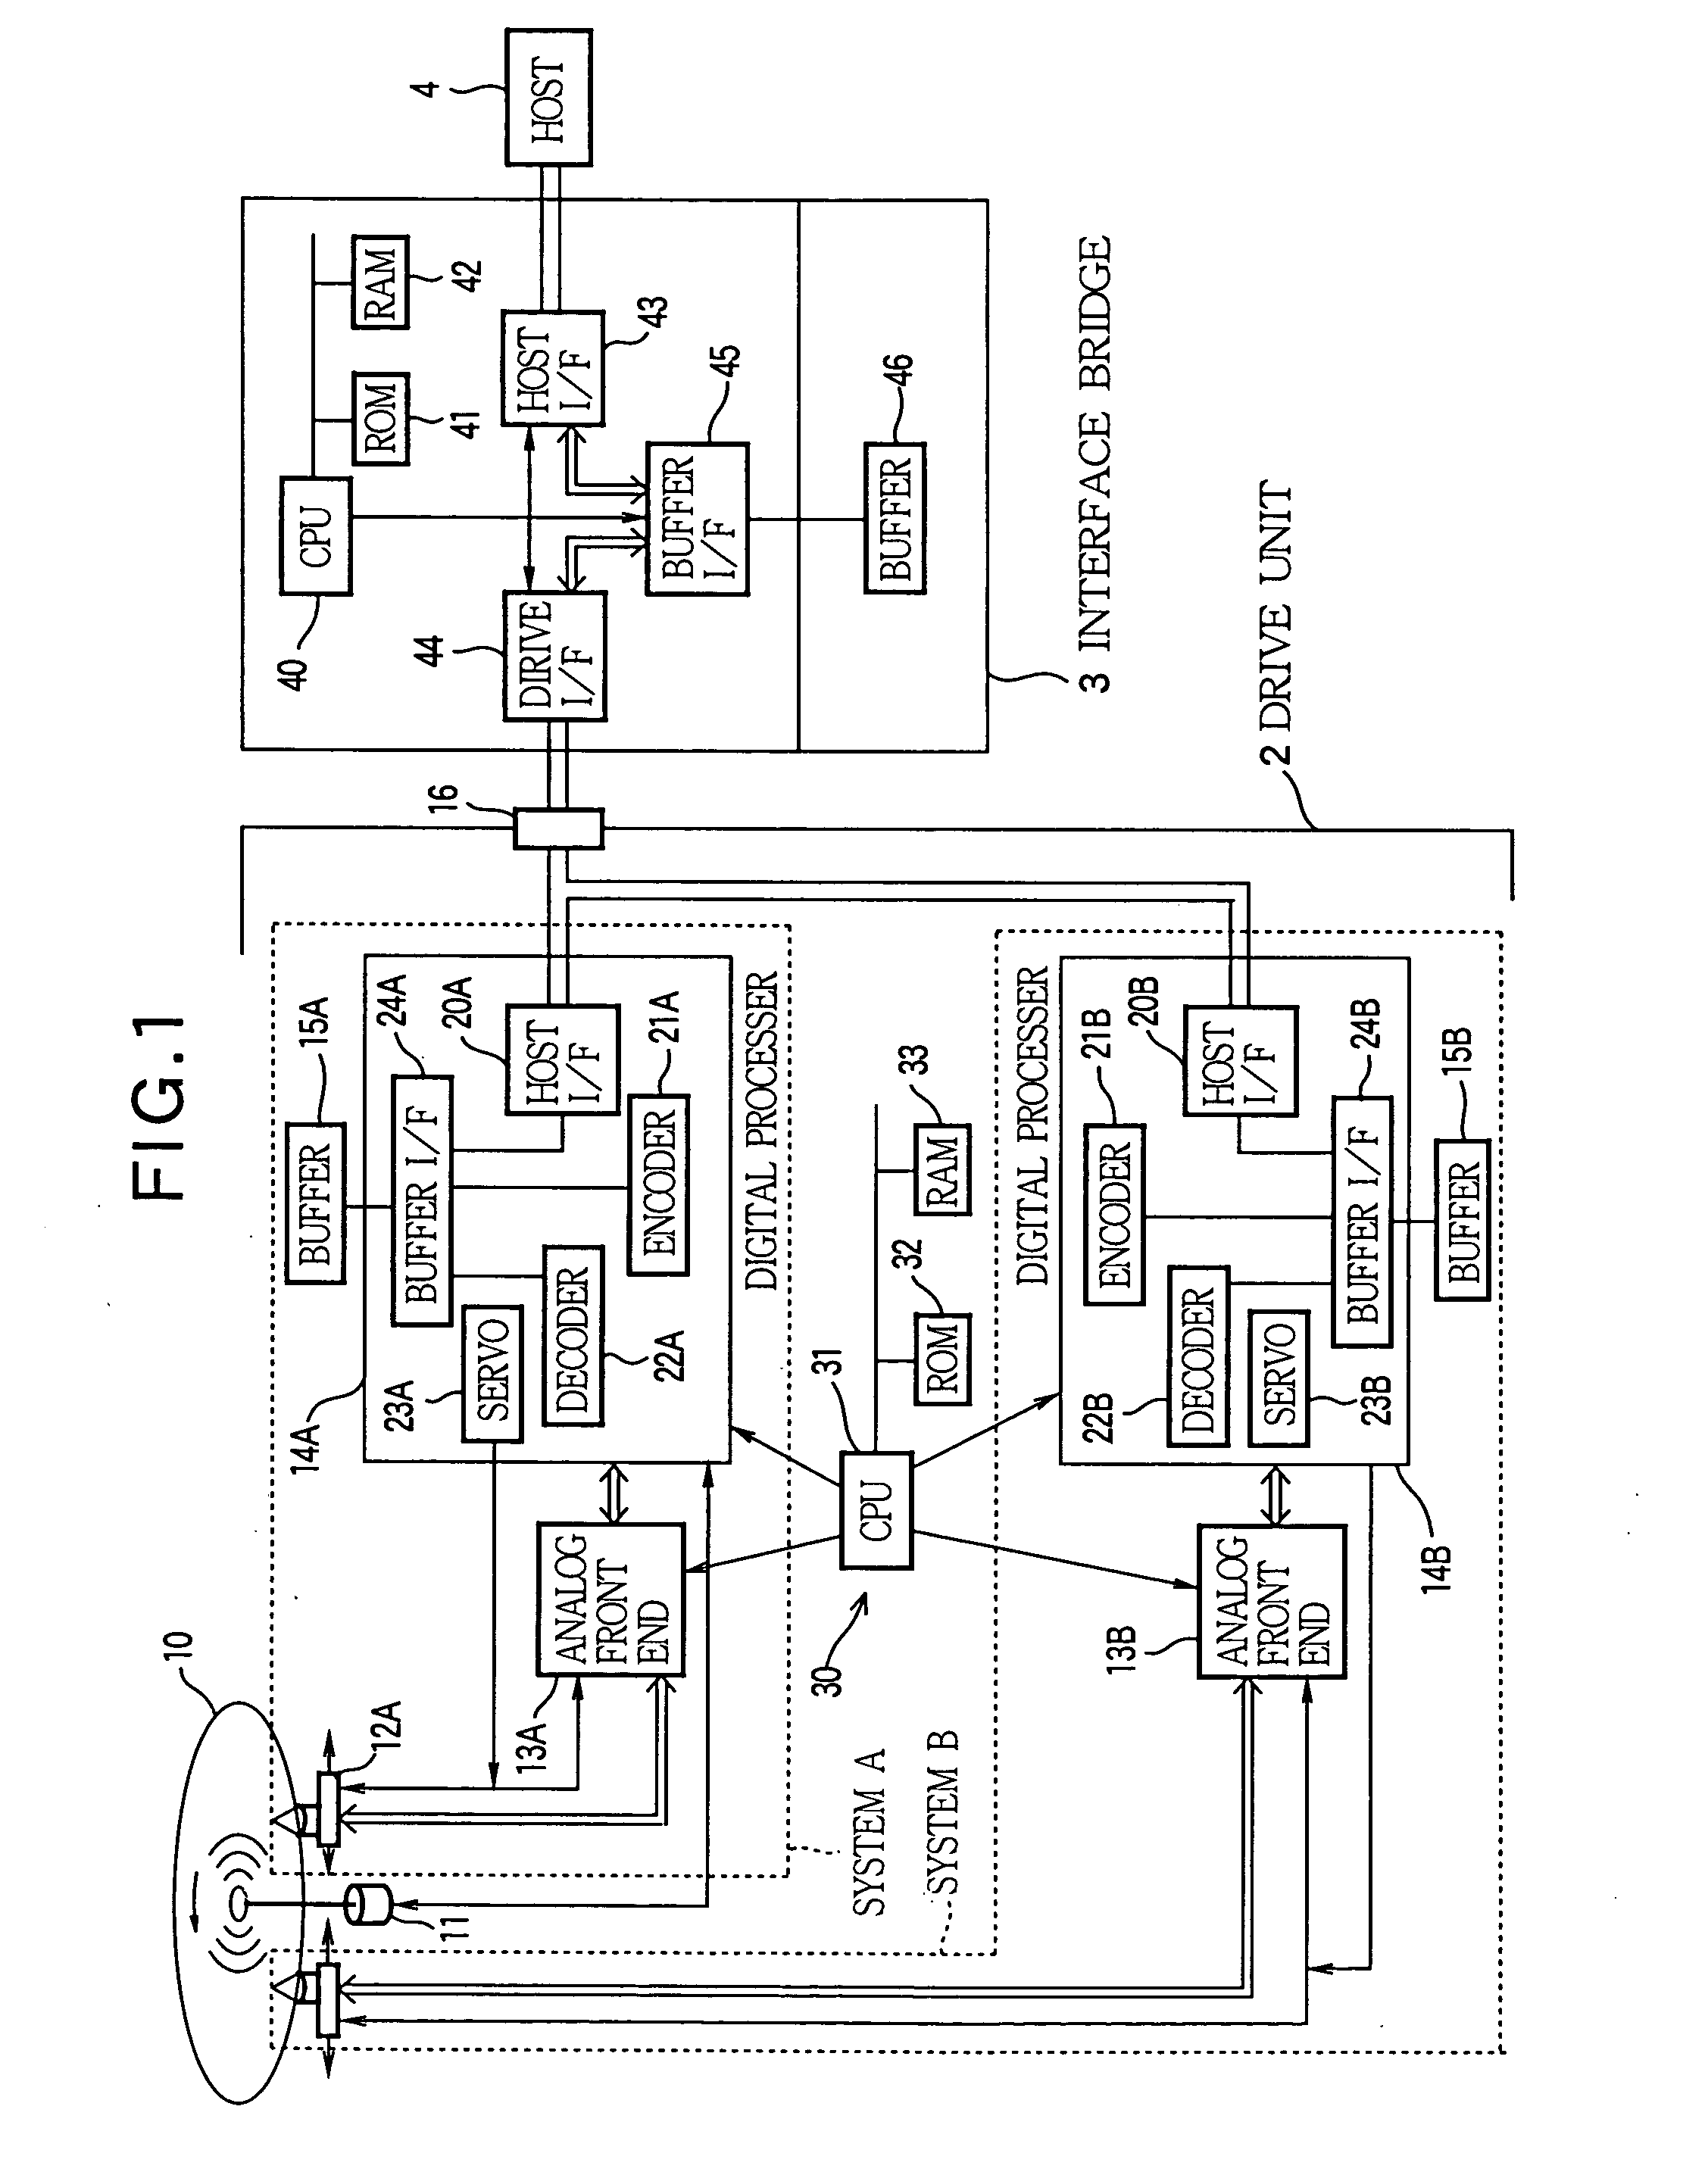 Optical disk apparatus with multiple reproduction/record units for parallel operation